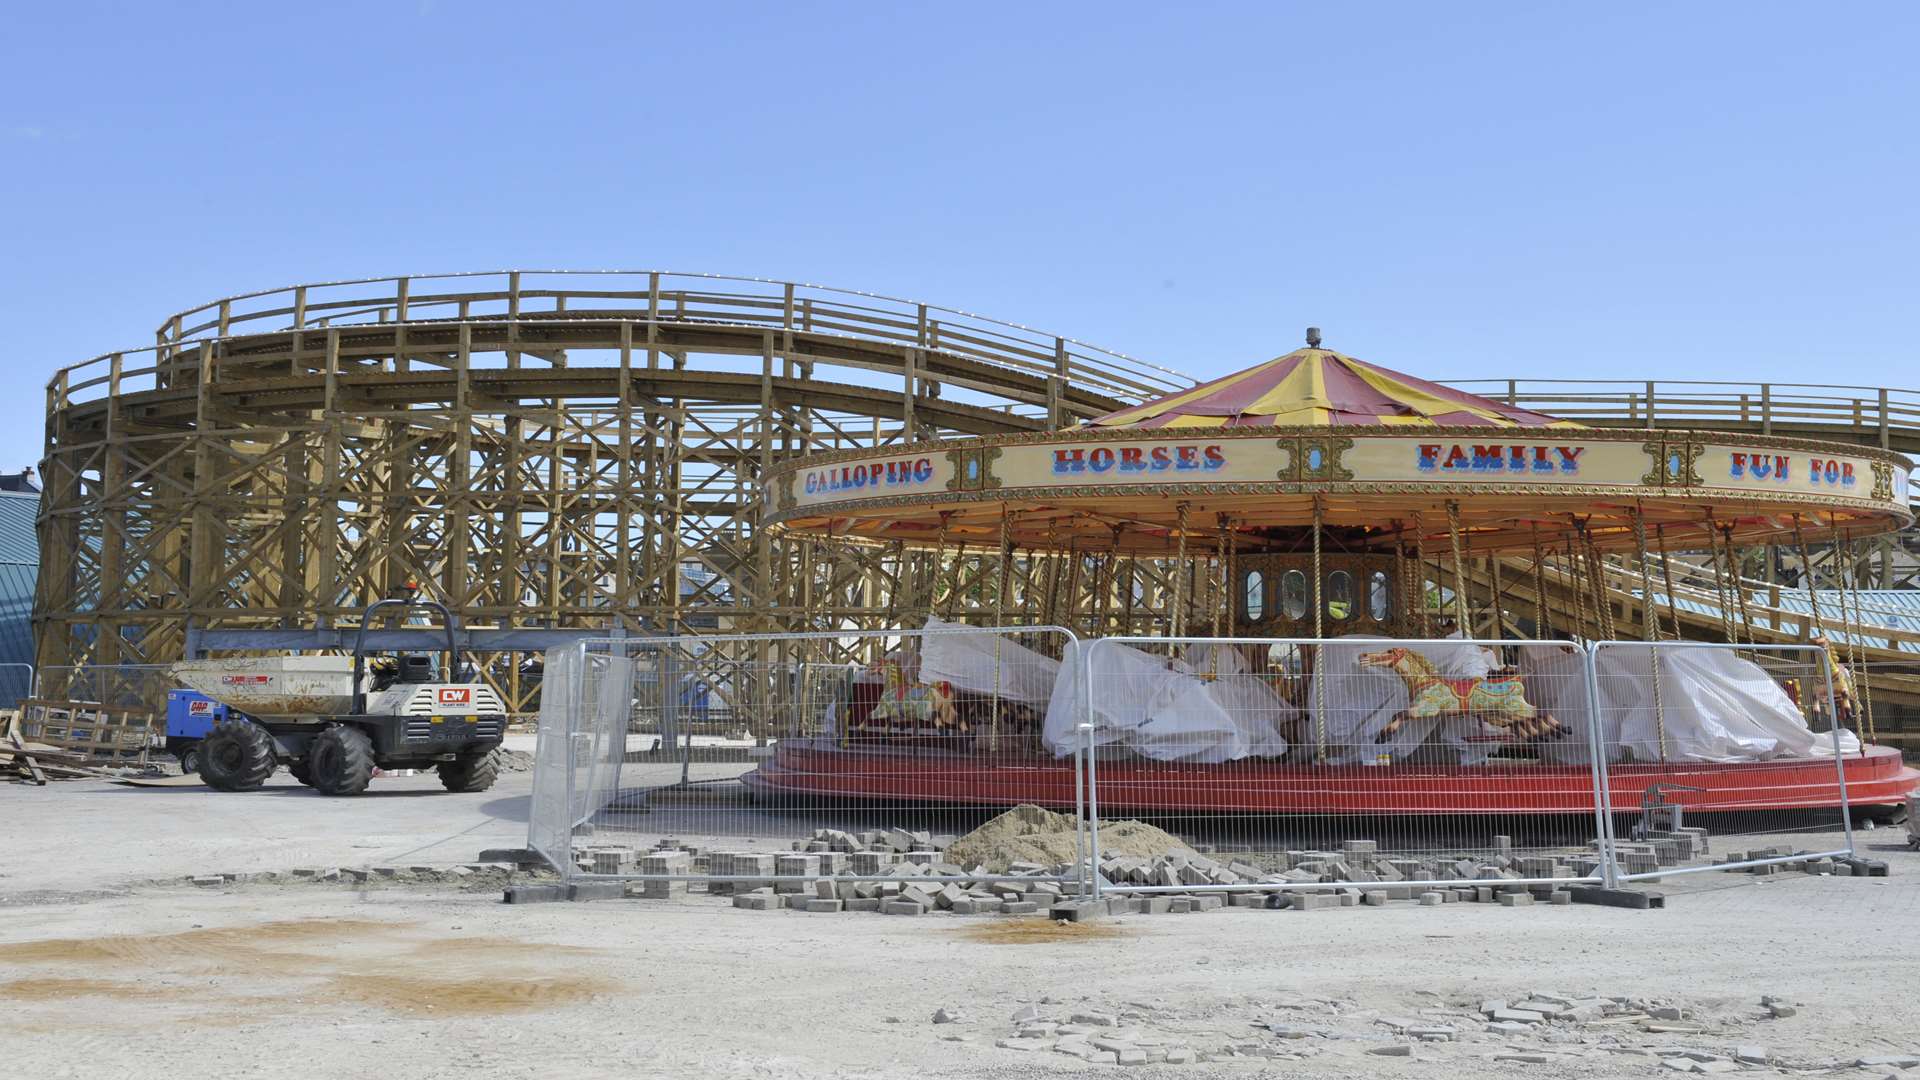 Dreamland will reopen on June 19